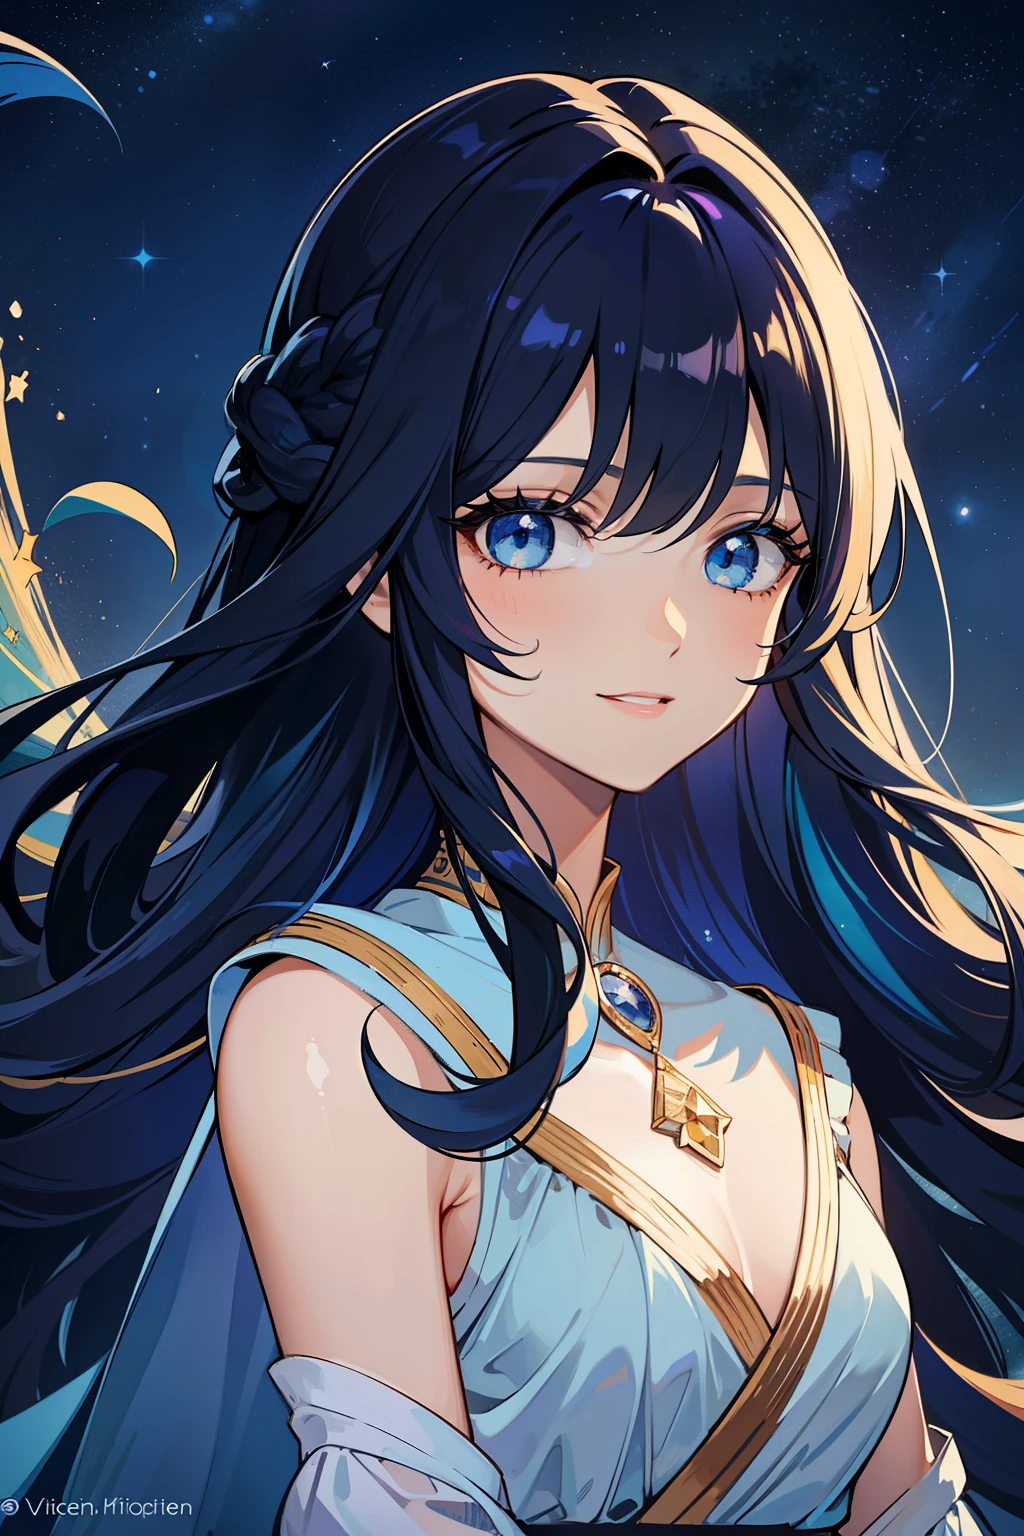 (high-quality, breathtaking),(expressive eyes, perfect face) portrait, 1girl, female, solo, adult woman, mum, age late 20's, black hair with stars in hair, multicolored hair, bright blue and yellow streaks in hair, white streaks in hair, when you look at her hair its as if you're staring into the night sky, light blue eyes, long hair length, soft wavy flowy hair, gentle smile, loose hair, side bangs, looking at viewer, portrait, happy expression, starry night by Vincent van Gogh in hair, white skin, soft red lips, elegant, regal, hair flowing in wind